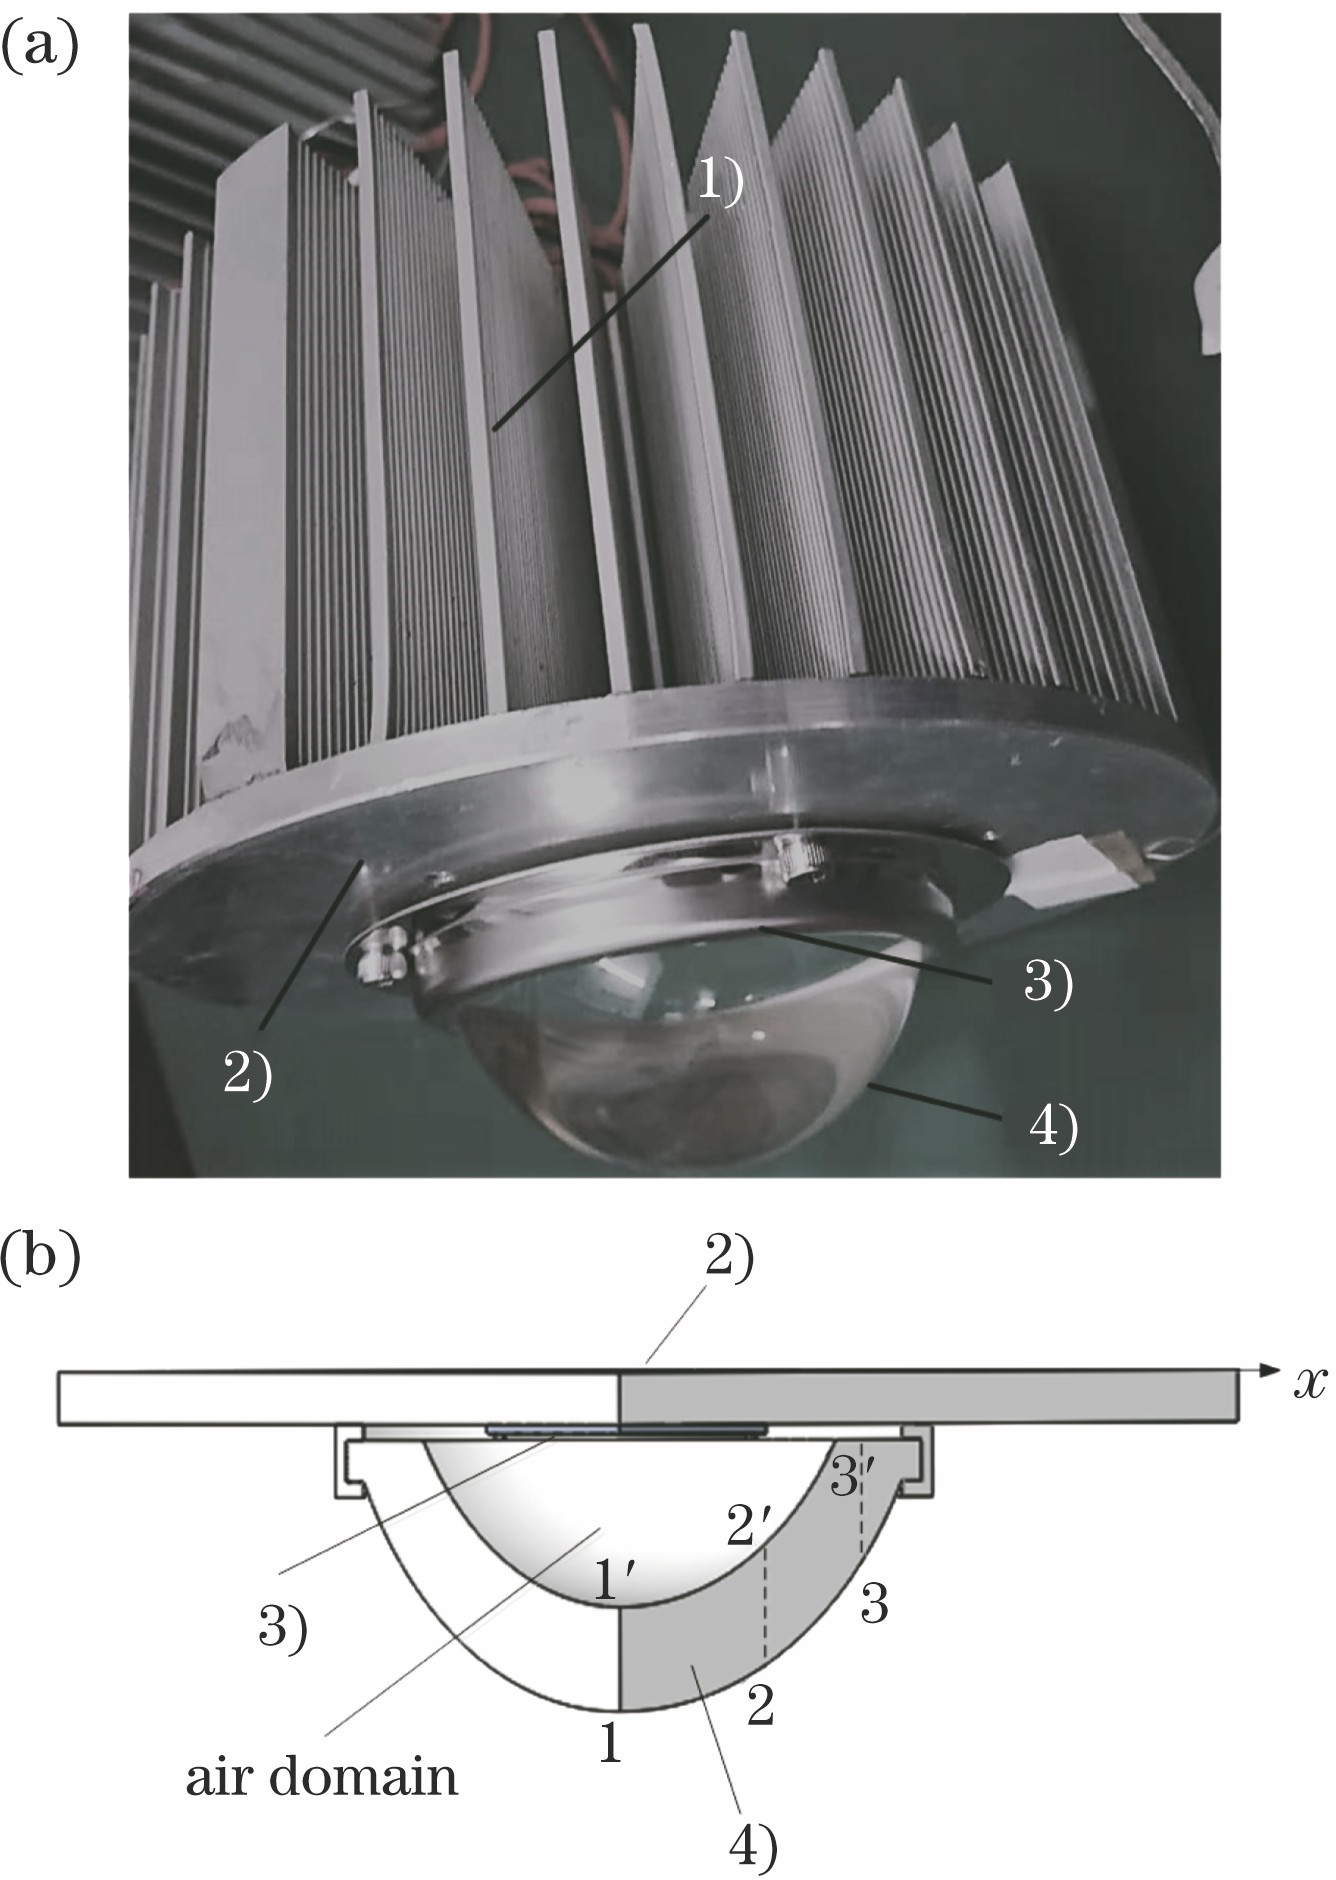 Physical model of LED. (a) Exterior photograph of LED; (b) interior structure model of lens